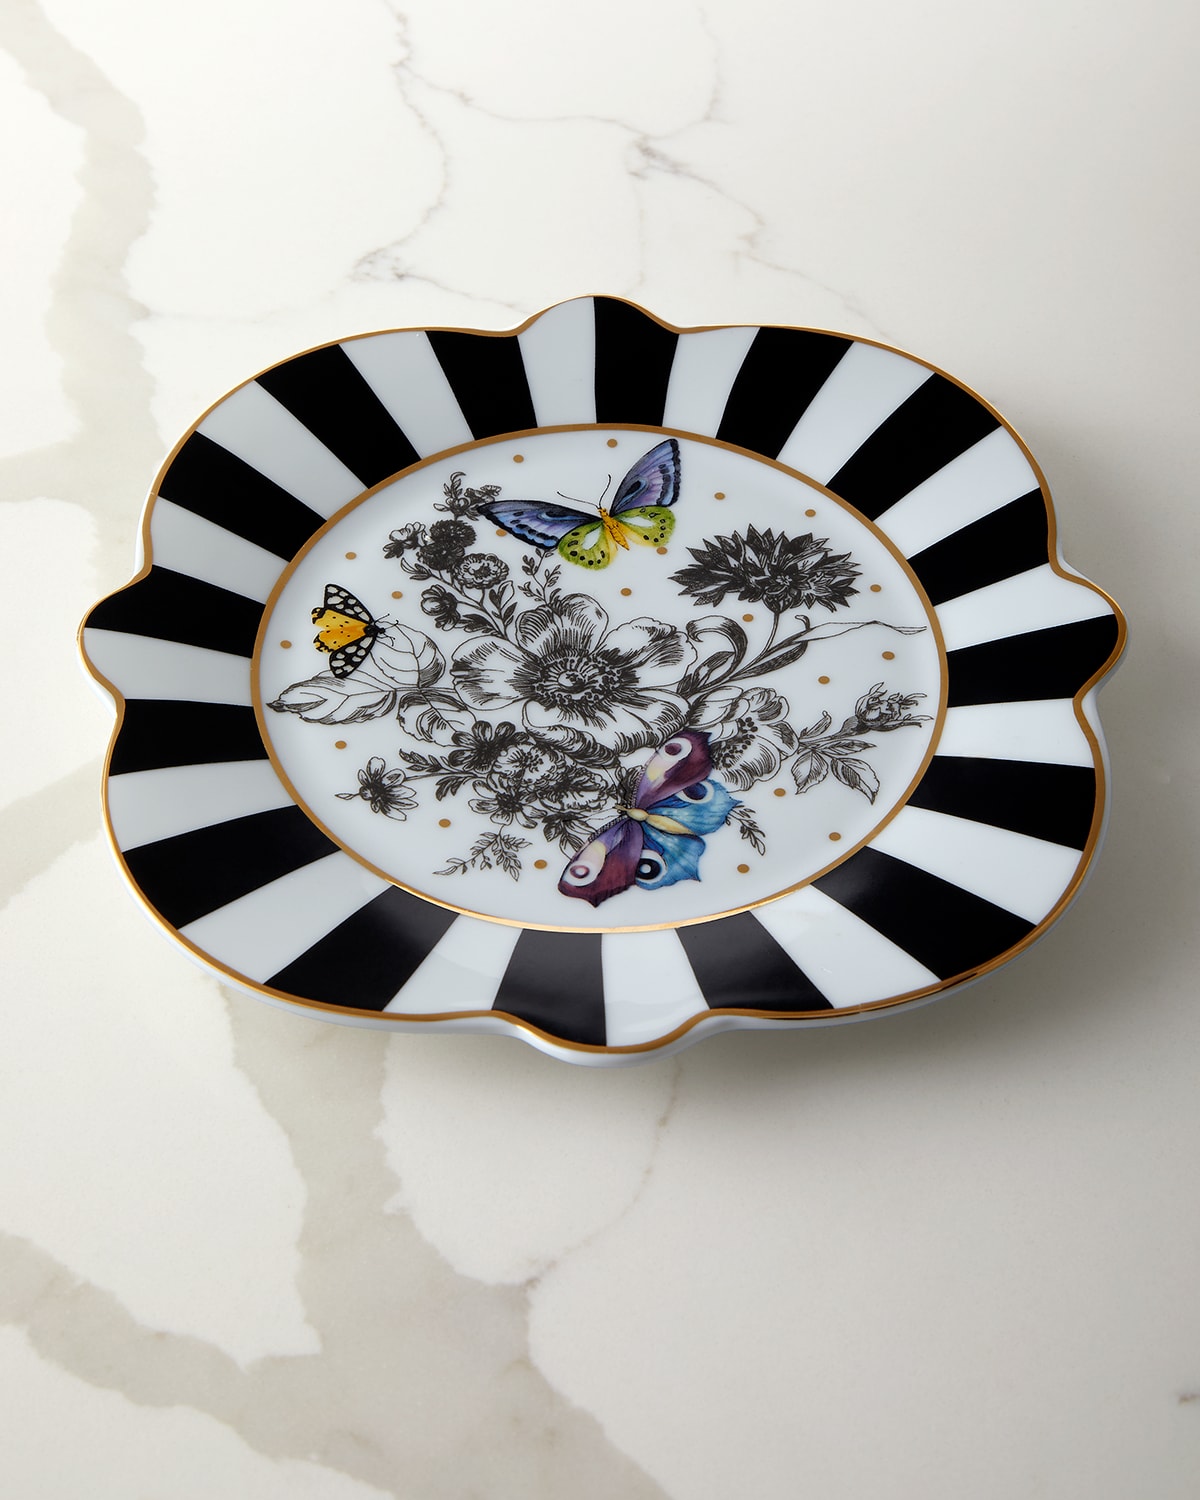 Mackenzie-childs Butterfly Toile Salad Plate In Black